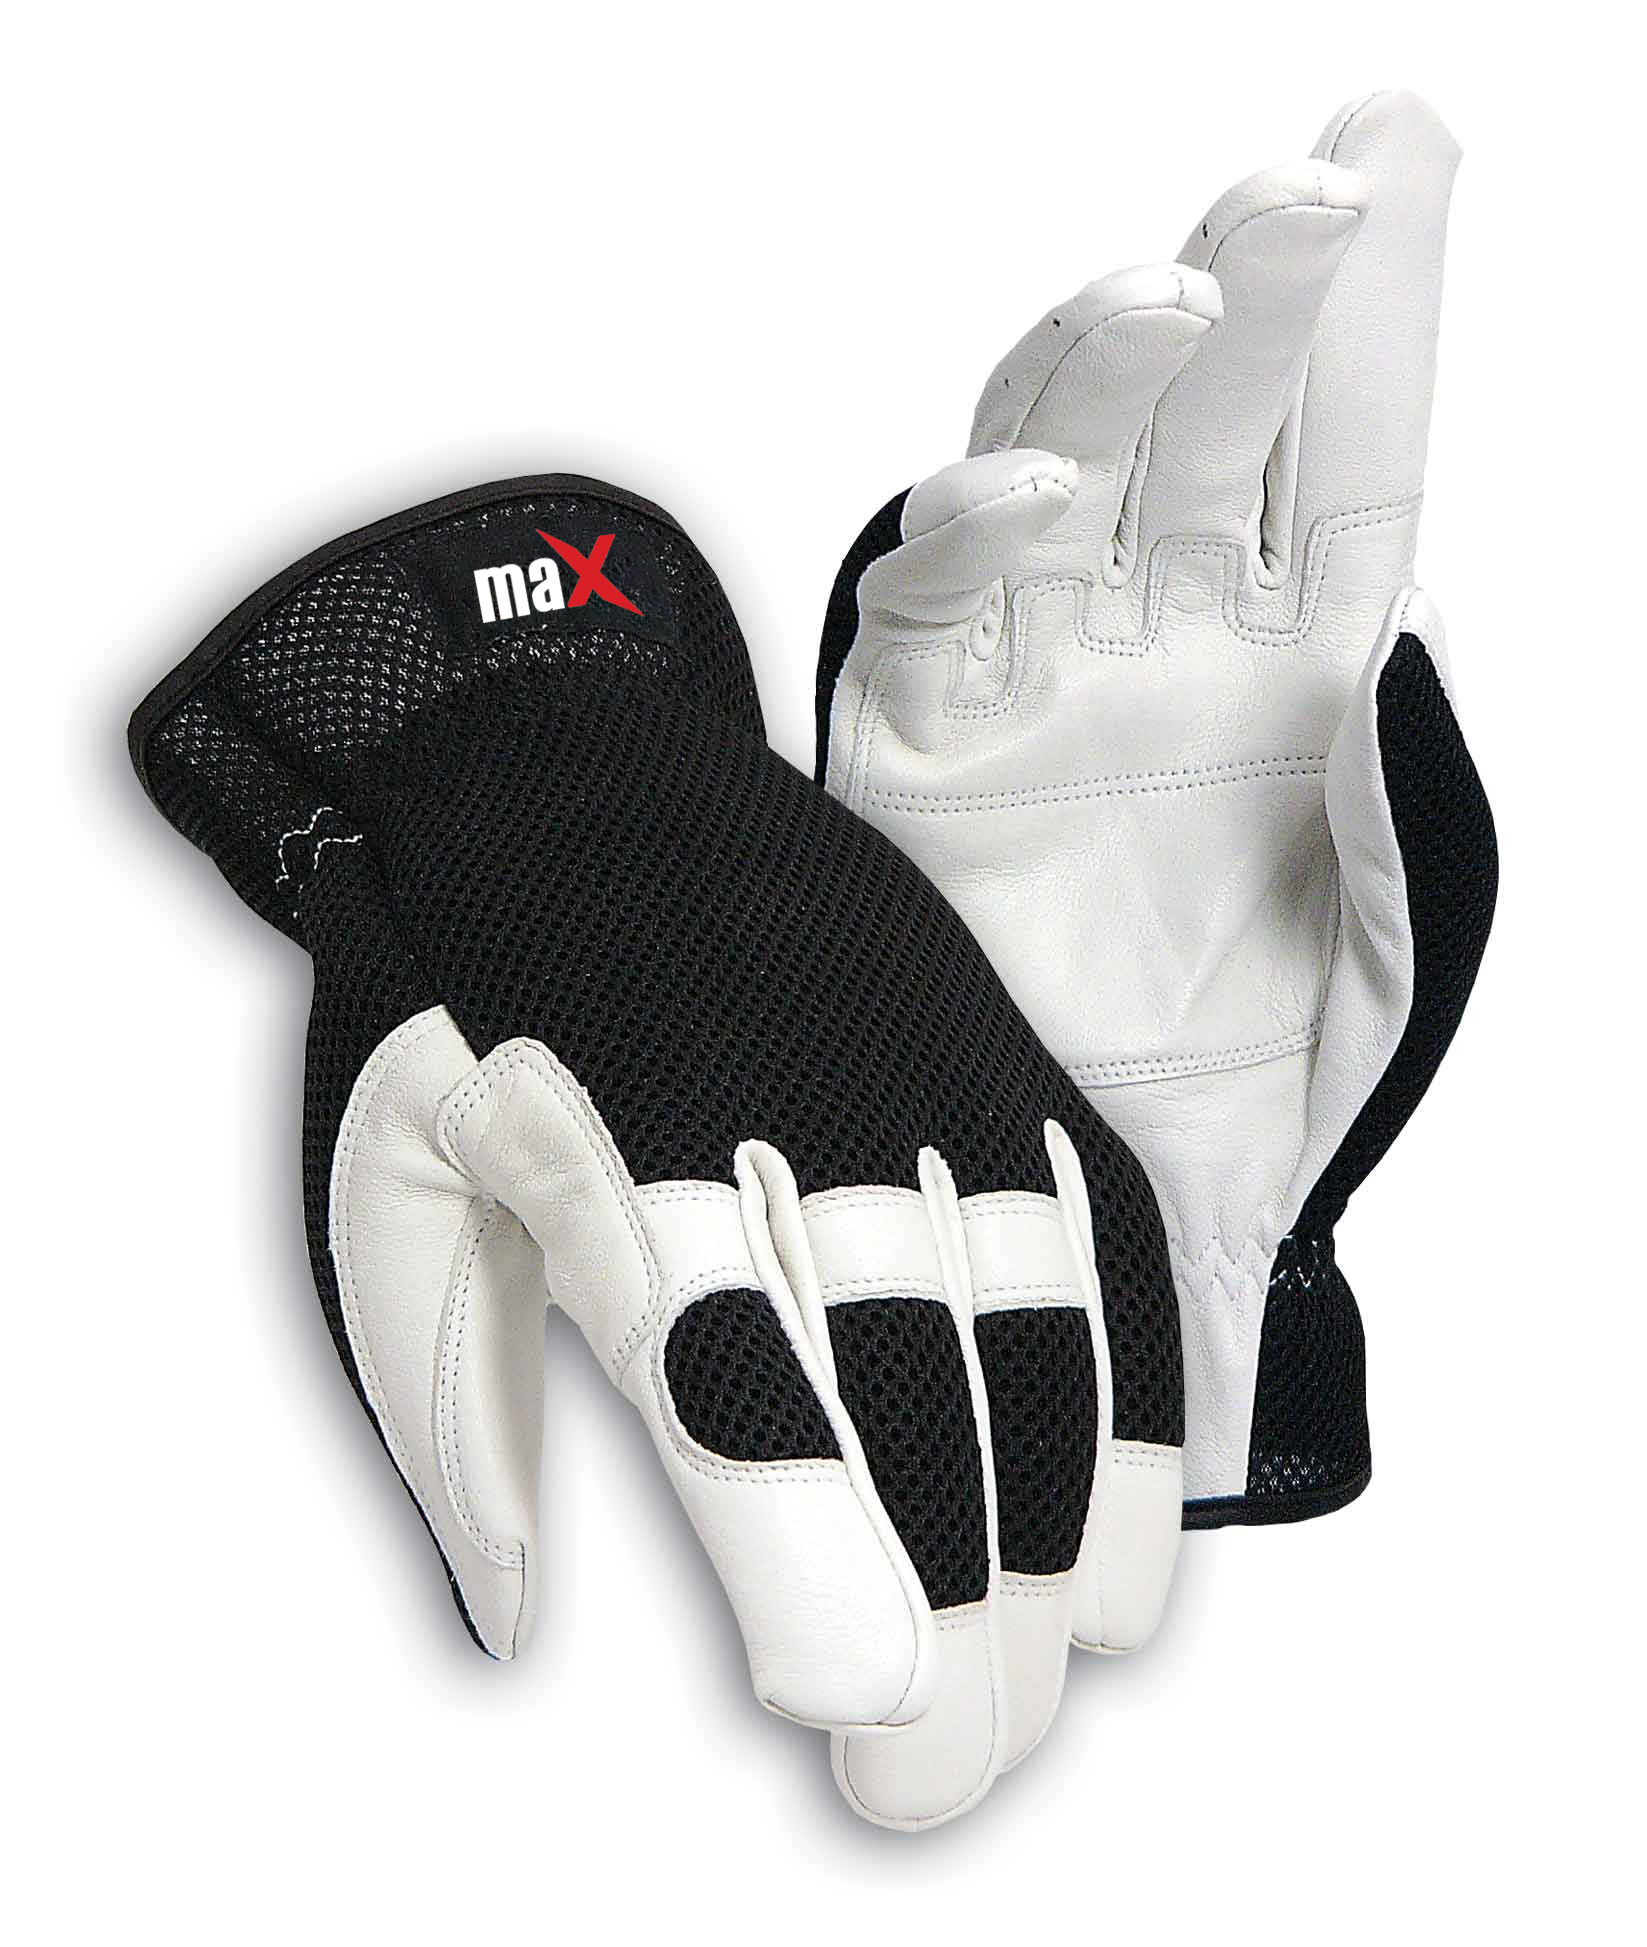 maX&trade; Extra White Goat Grain, Double Palm Gloves